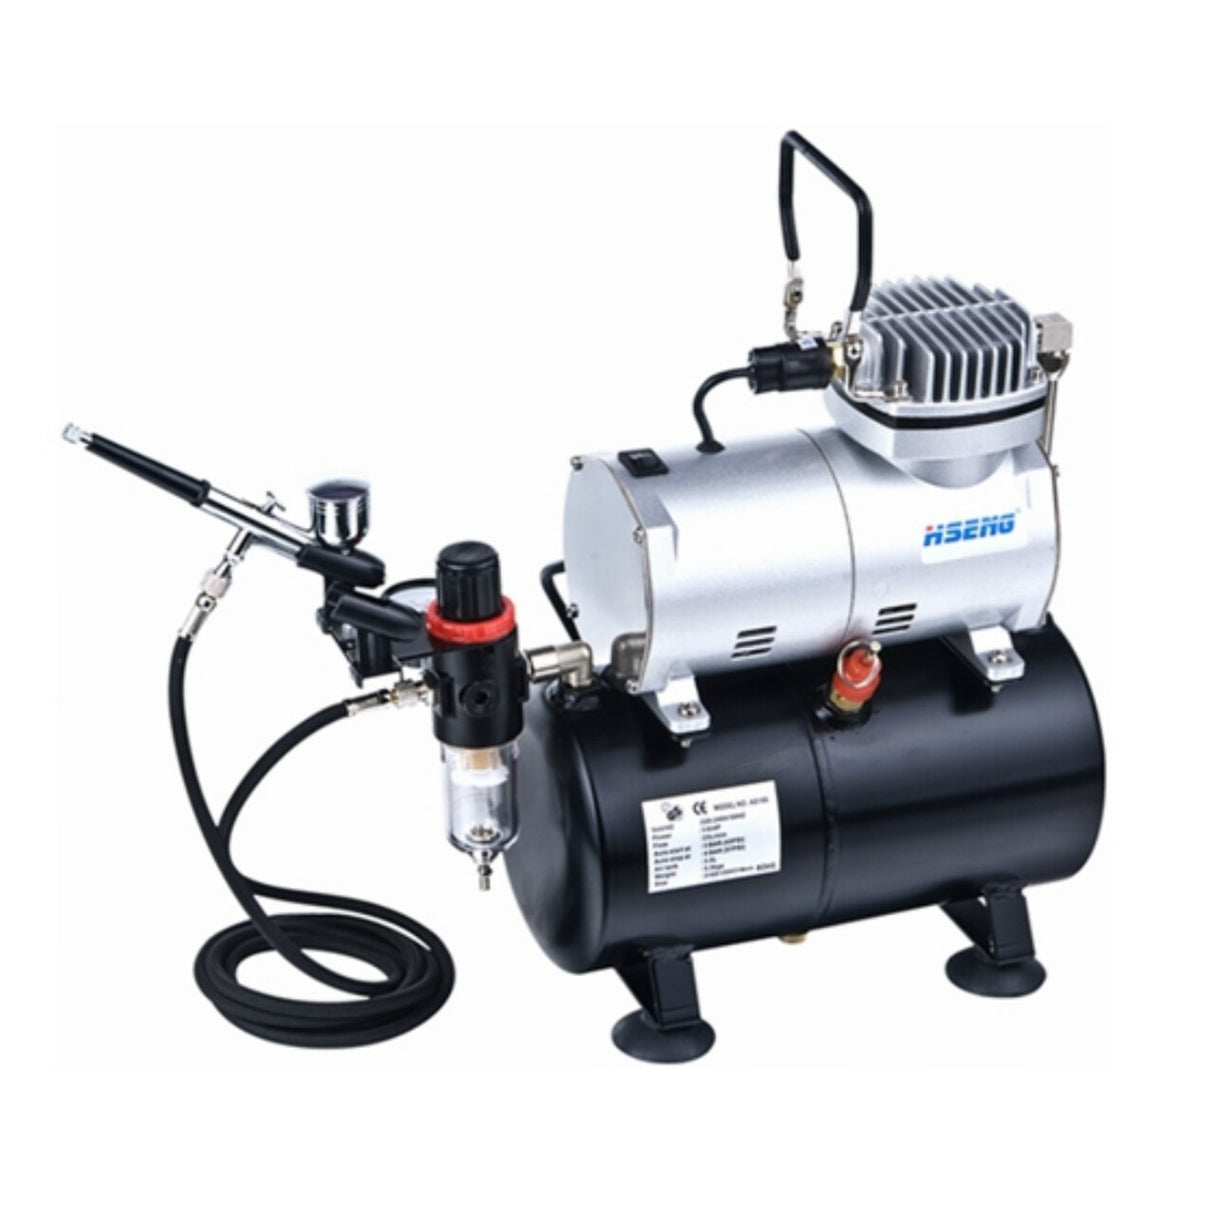 Hseng AS186K Airbrush And Tanked Compressor Starter Set Hseng AIRBRUSHES & COMPRESSORS